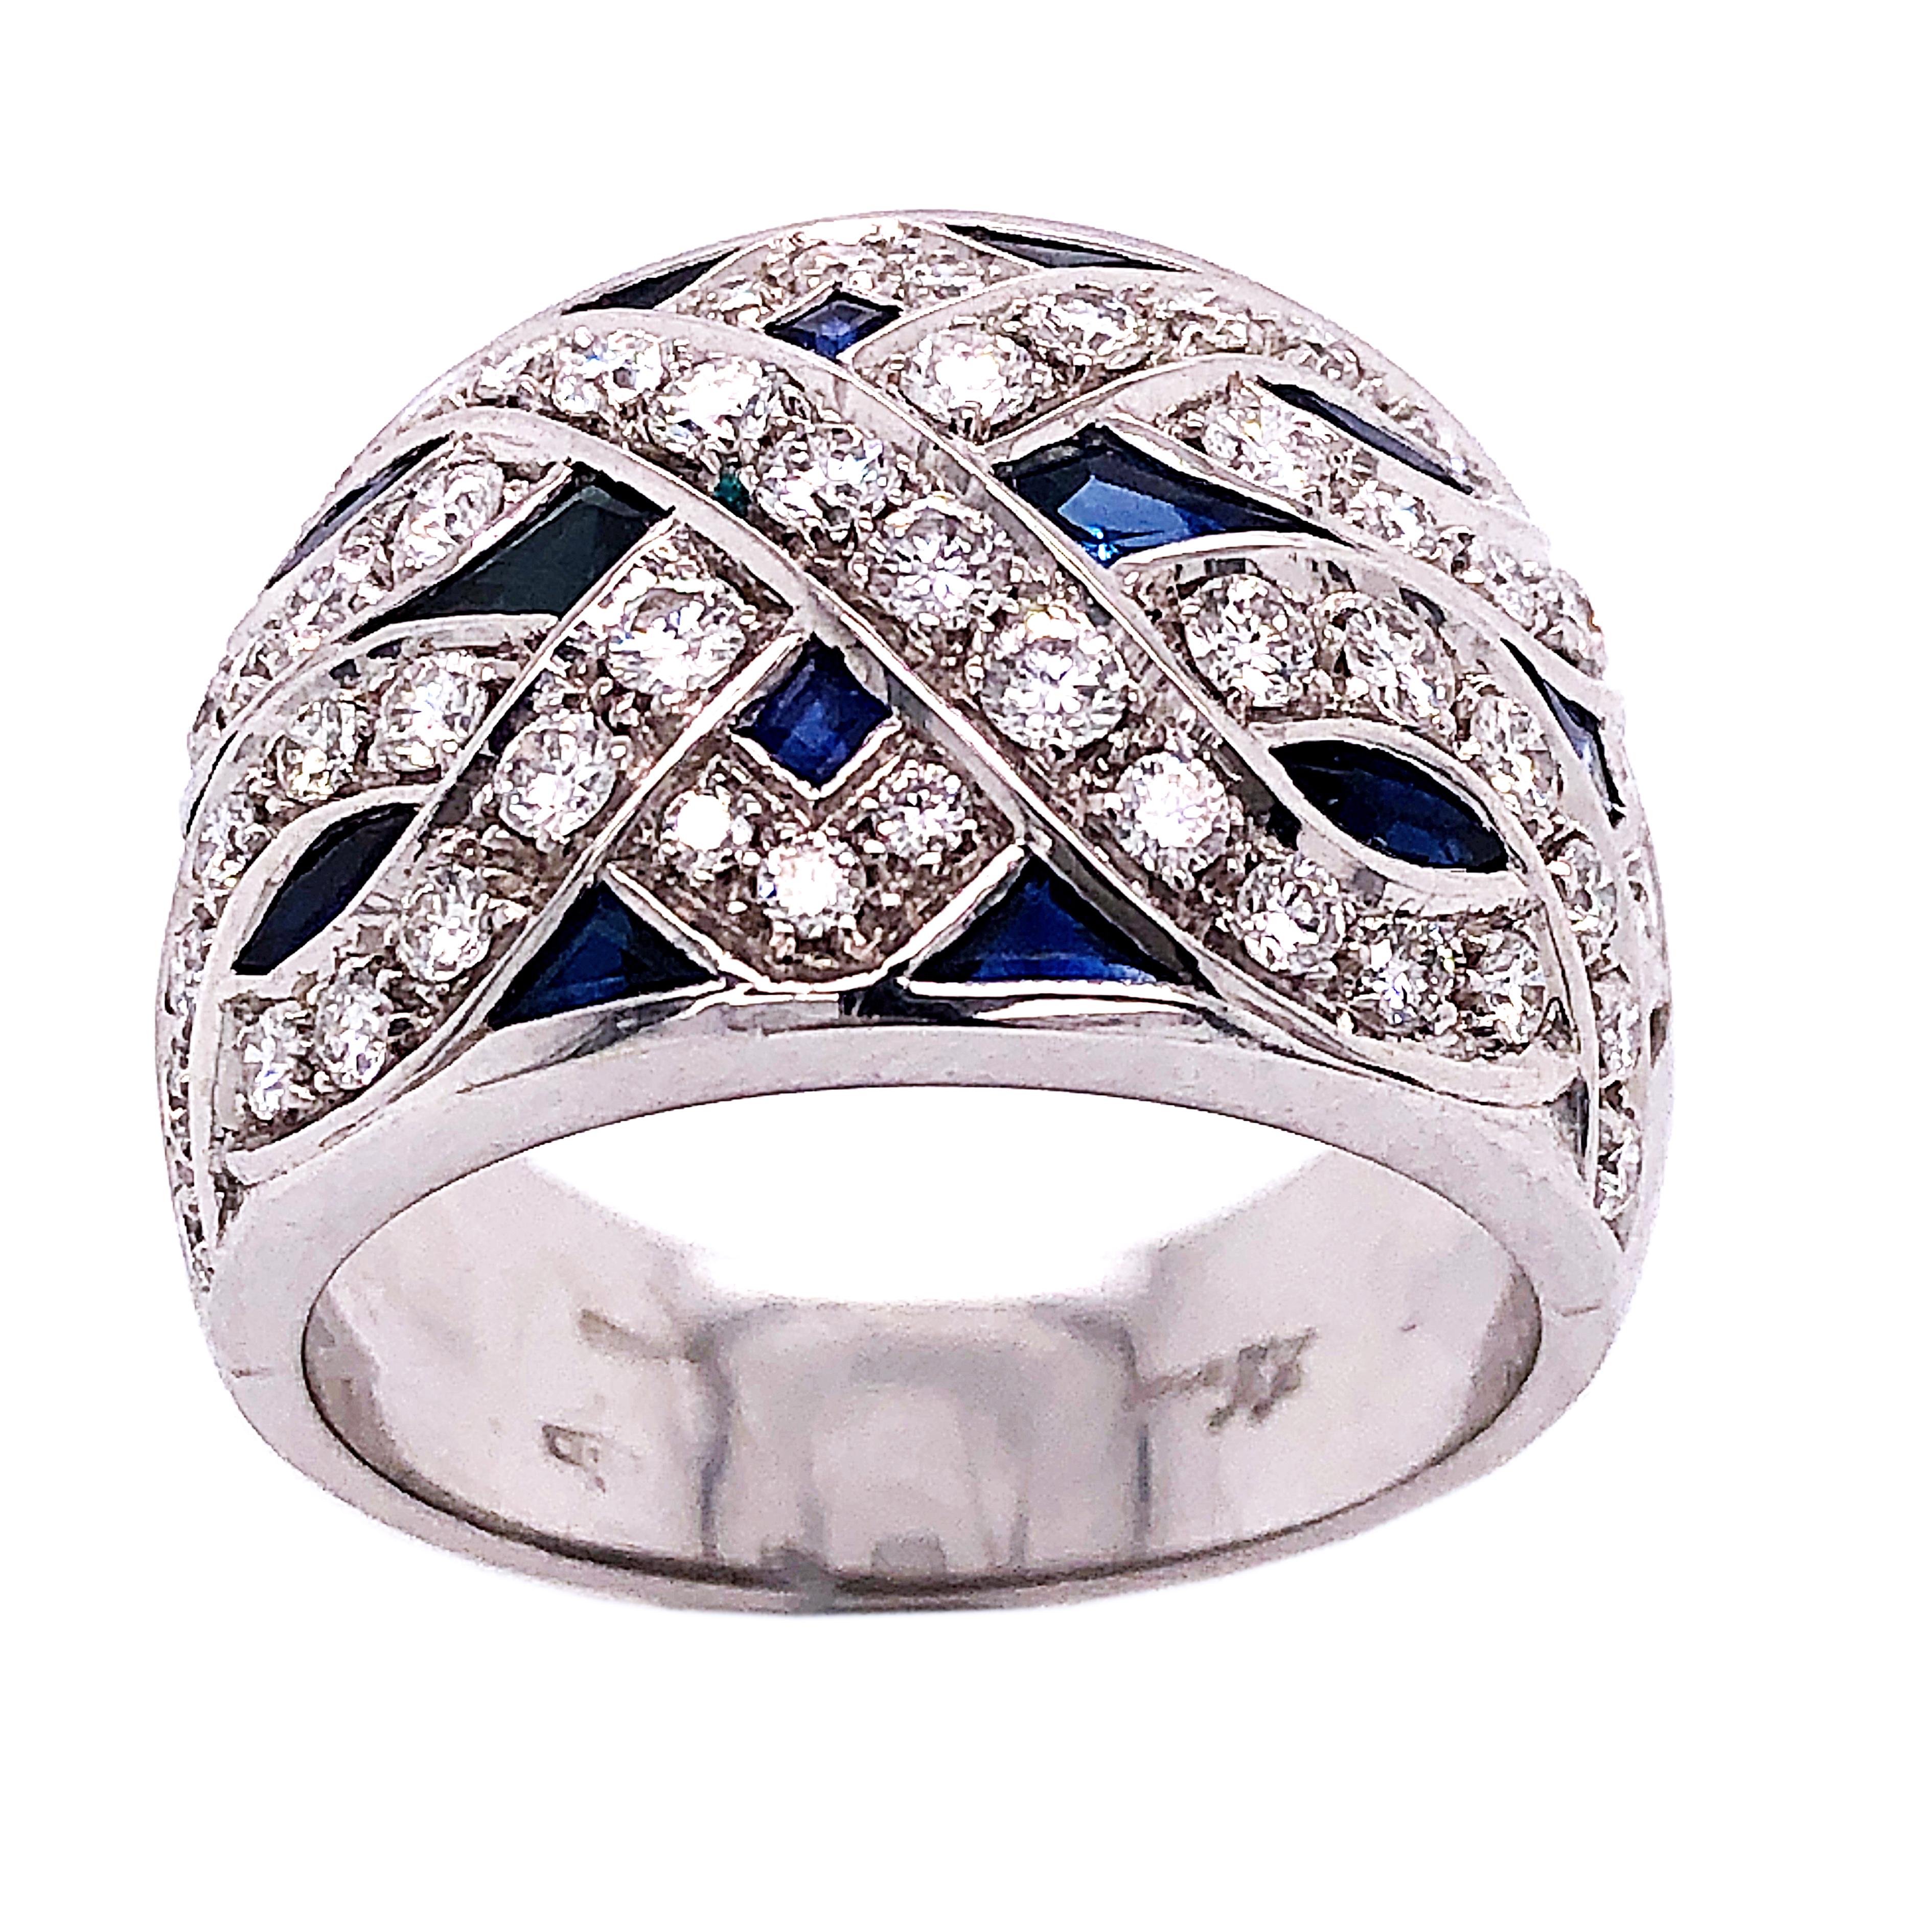 Original 1965 Chic yet Timeless One-of-a-kind Sumptuous Cocktail Ring featuring 3.90Kt Natural Hand Inlaid Blue Sapphire, 1.23 Carat White Diamond(D-E, VvS1) in an 18Kt White Gold setting.

Us Size 6 1/2
French size 53.5
We are pleased to offer